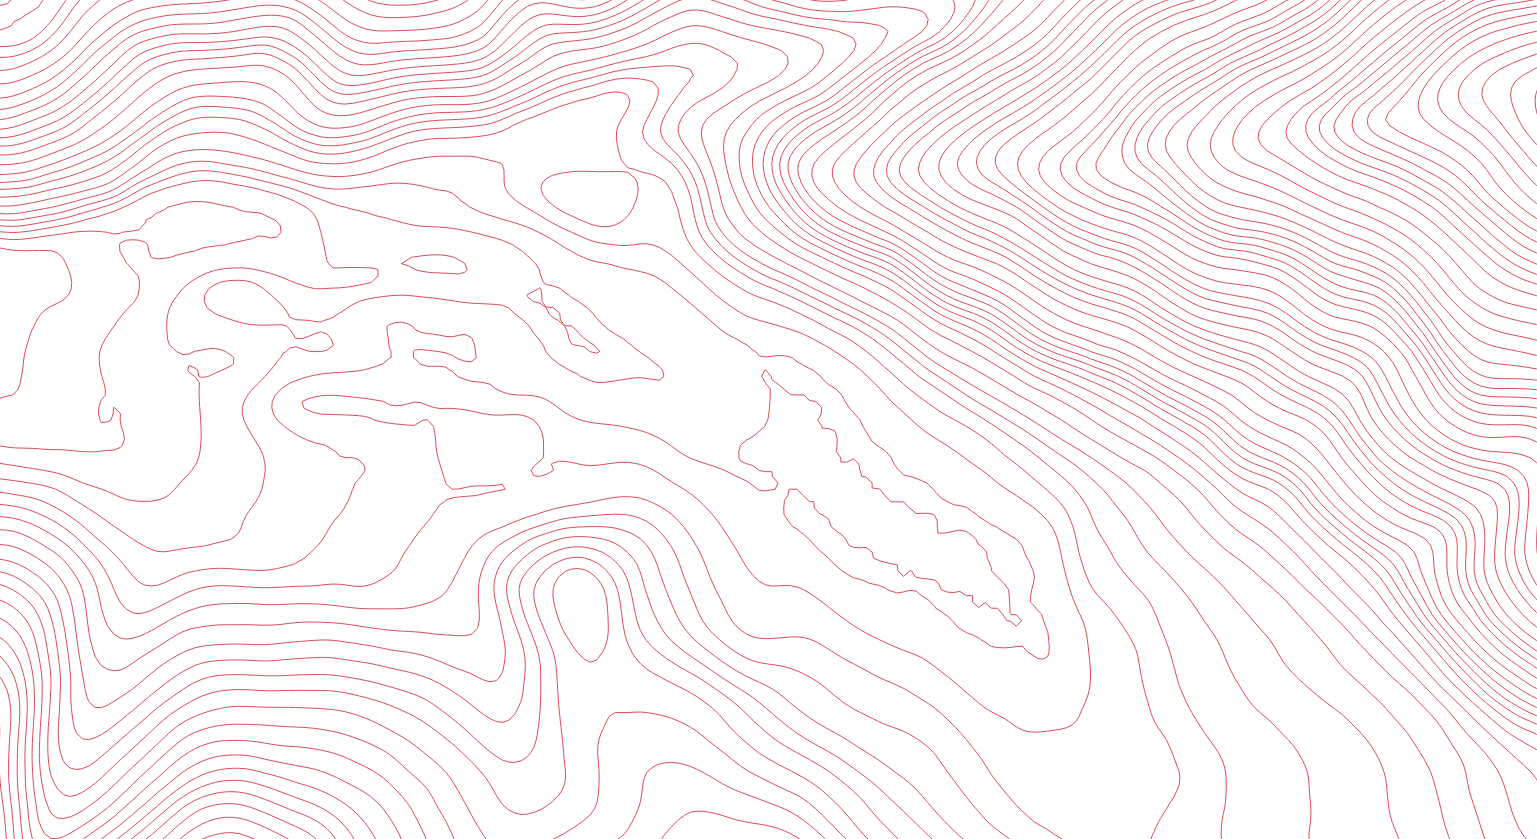 All contours with less than 20 points were removed, no smoothing. added. 